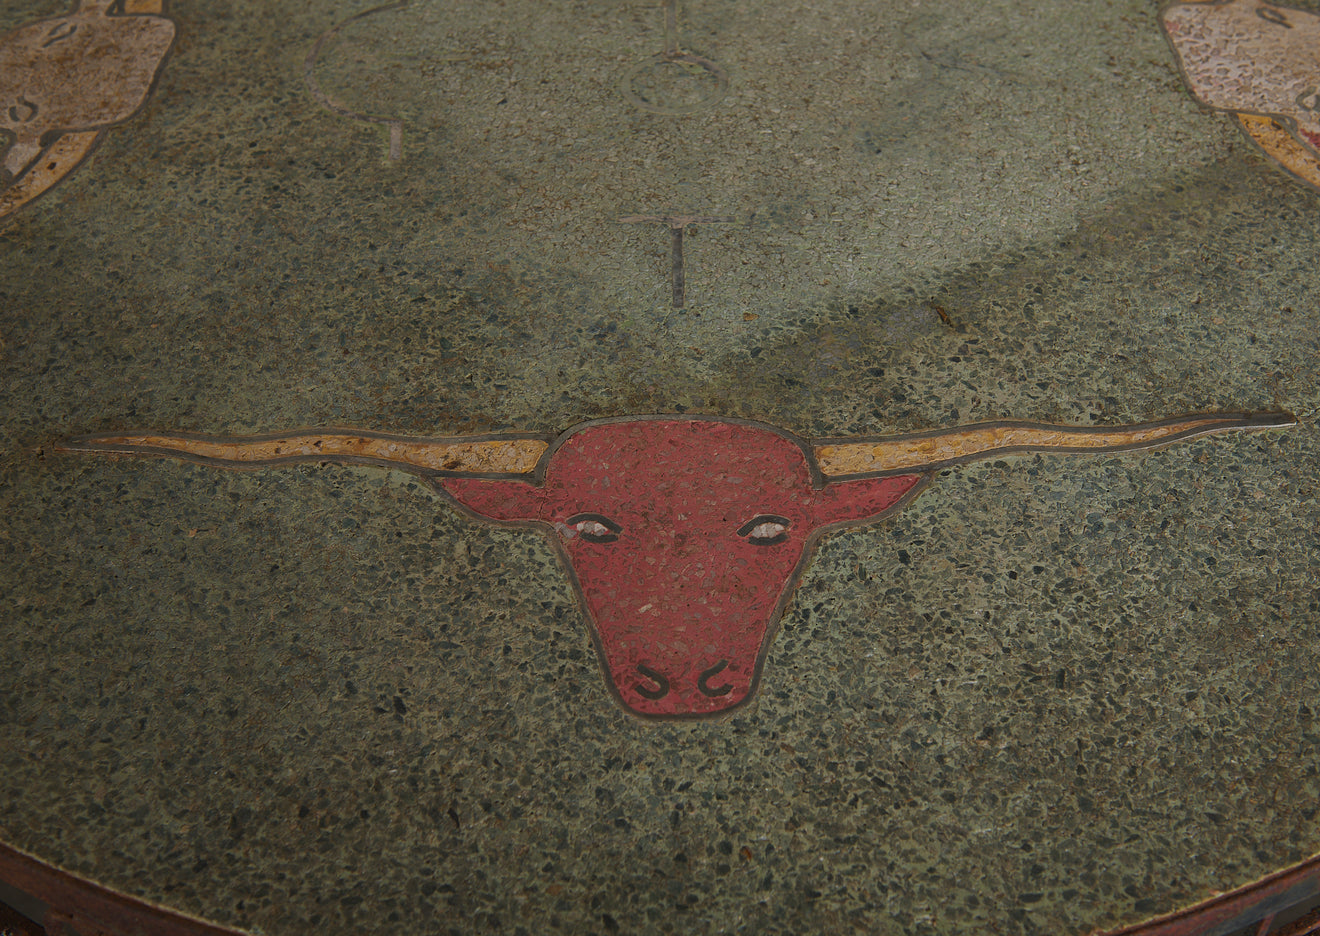 COWBOY PATIO TABLE WITH BRANDING IRONS AND STEER MOTIFS